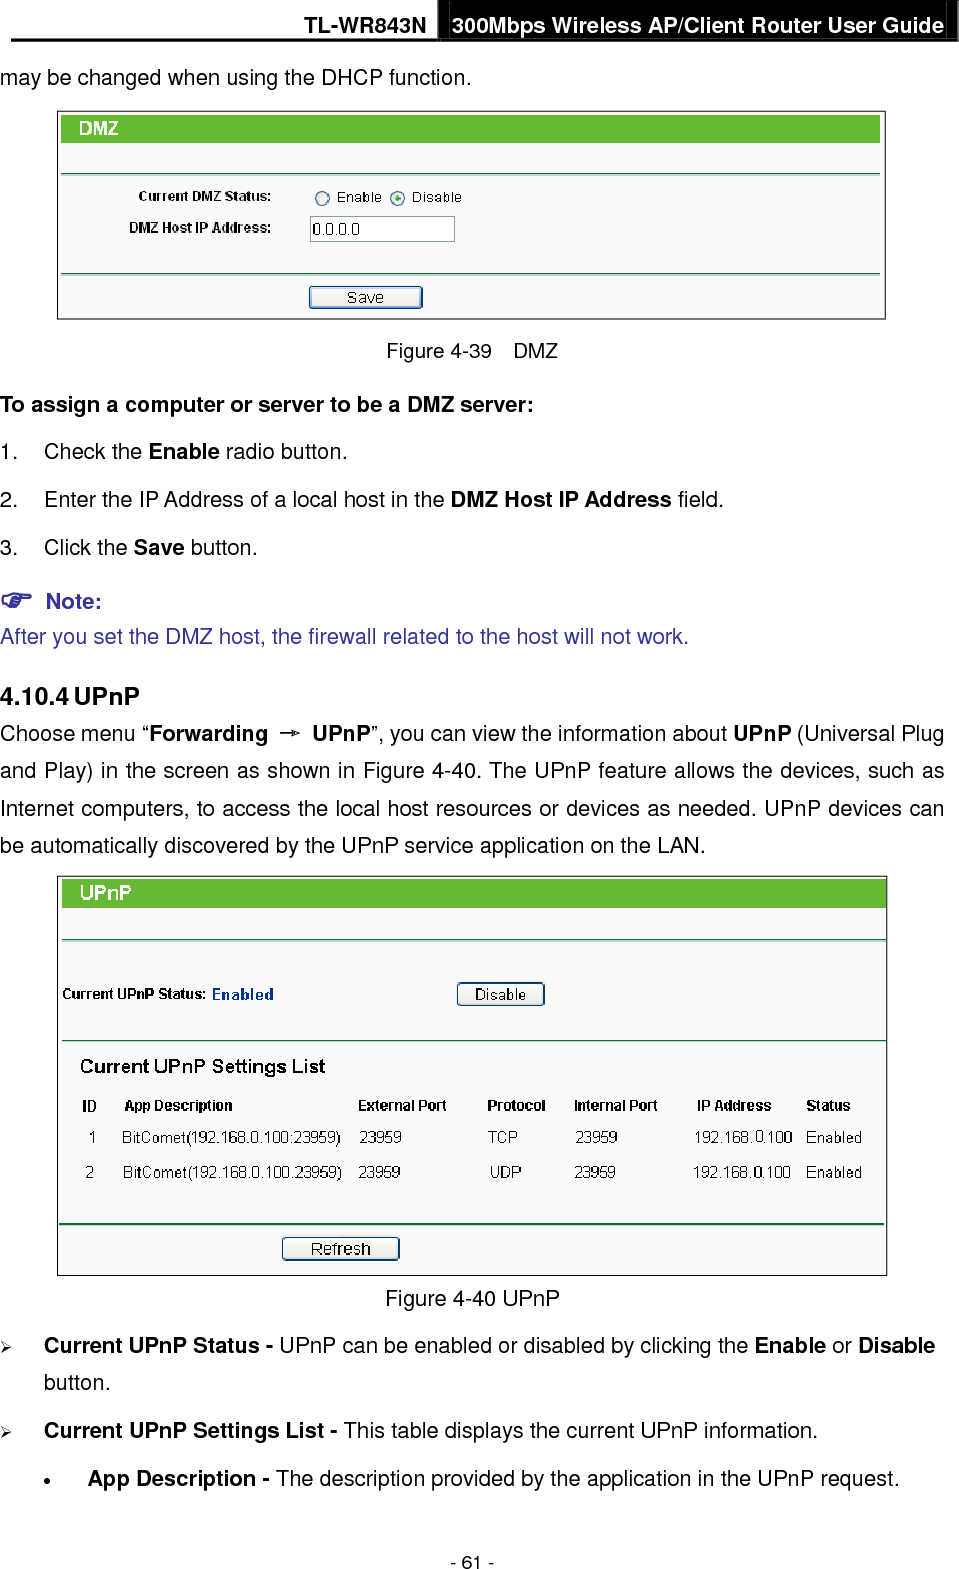 TL-WR843N 300Mbps Wireless AP/Client Router User Guide - 61 - may be changed when using the DHCP function. Figure 4-39  DMZ To assign a computer or server to be a DMZ server:   1. Check the Enable radio button.2. Enter the IP Address of a local host in the DMZ Host IP Address field.3. Click the Save button. Note:After you set the DMZ host, the firewall related to the host will not work. 4.10.4 UPnP Choose menu “Forwarding → UPnP”, you can view the information about UPnP (Universal Plug and Play) in the screen as shown in Figure 4-40. The UPnP feature allows the devices, such as Internet computers, to access the local host resources or devices as needed. UPnP devices can be automatically discovered by the UPnP service application on the LAN.   Figure 4-40 UPnP Current UPnP Status - UPnP can be enabled or disabled by clicking the Enable or Disablebutton.Current UPnP Settings List - This table displays the current UPnP information.•App Description - The description provided by the application in the UPnP request.